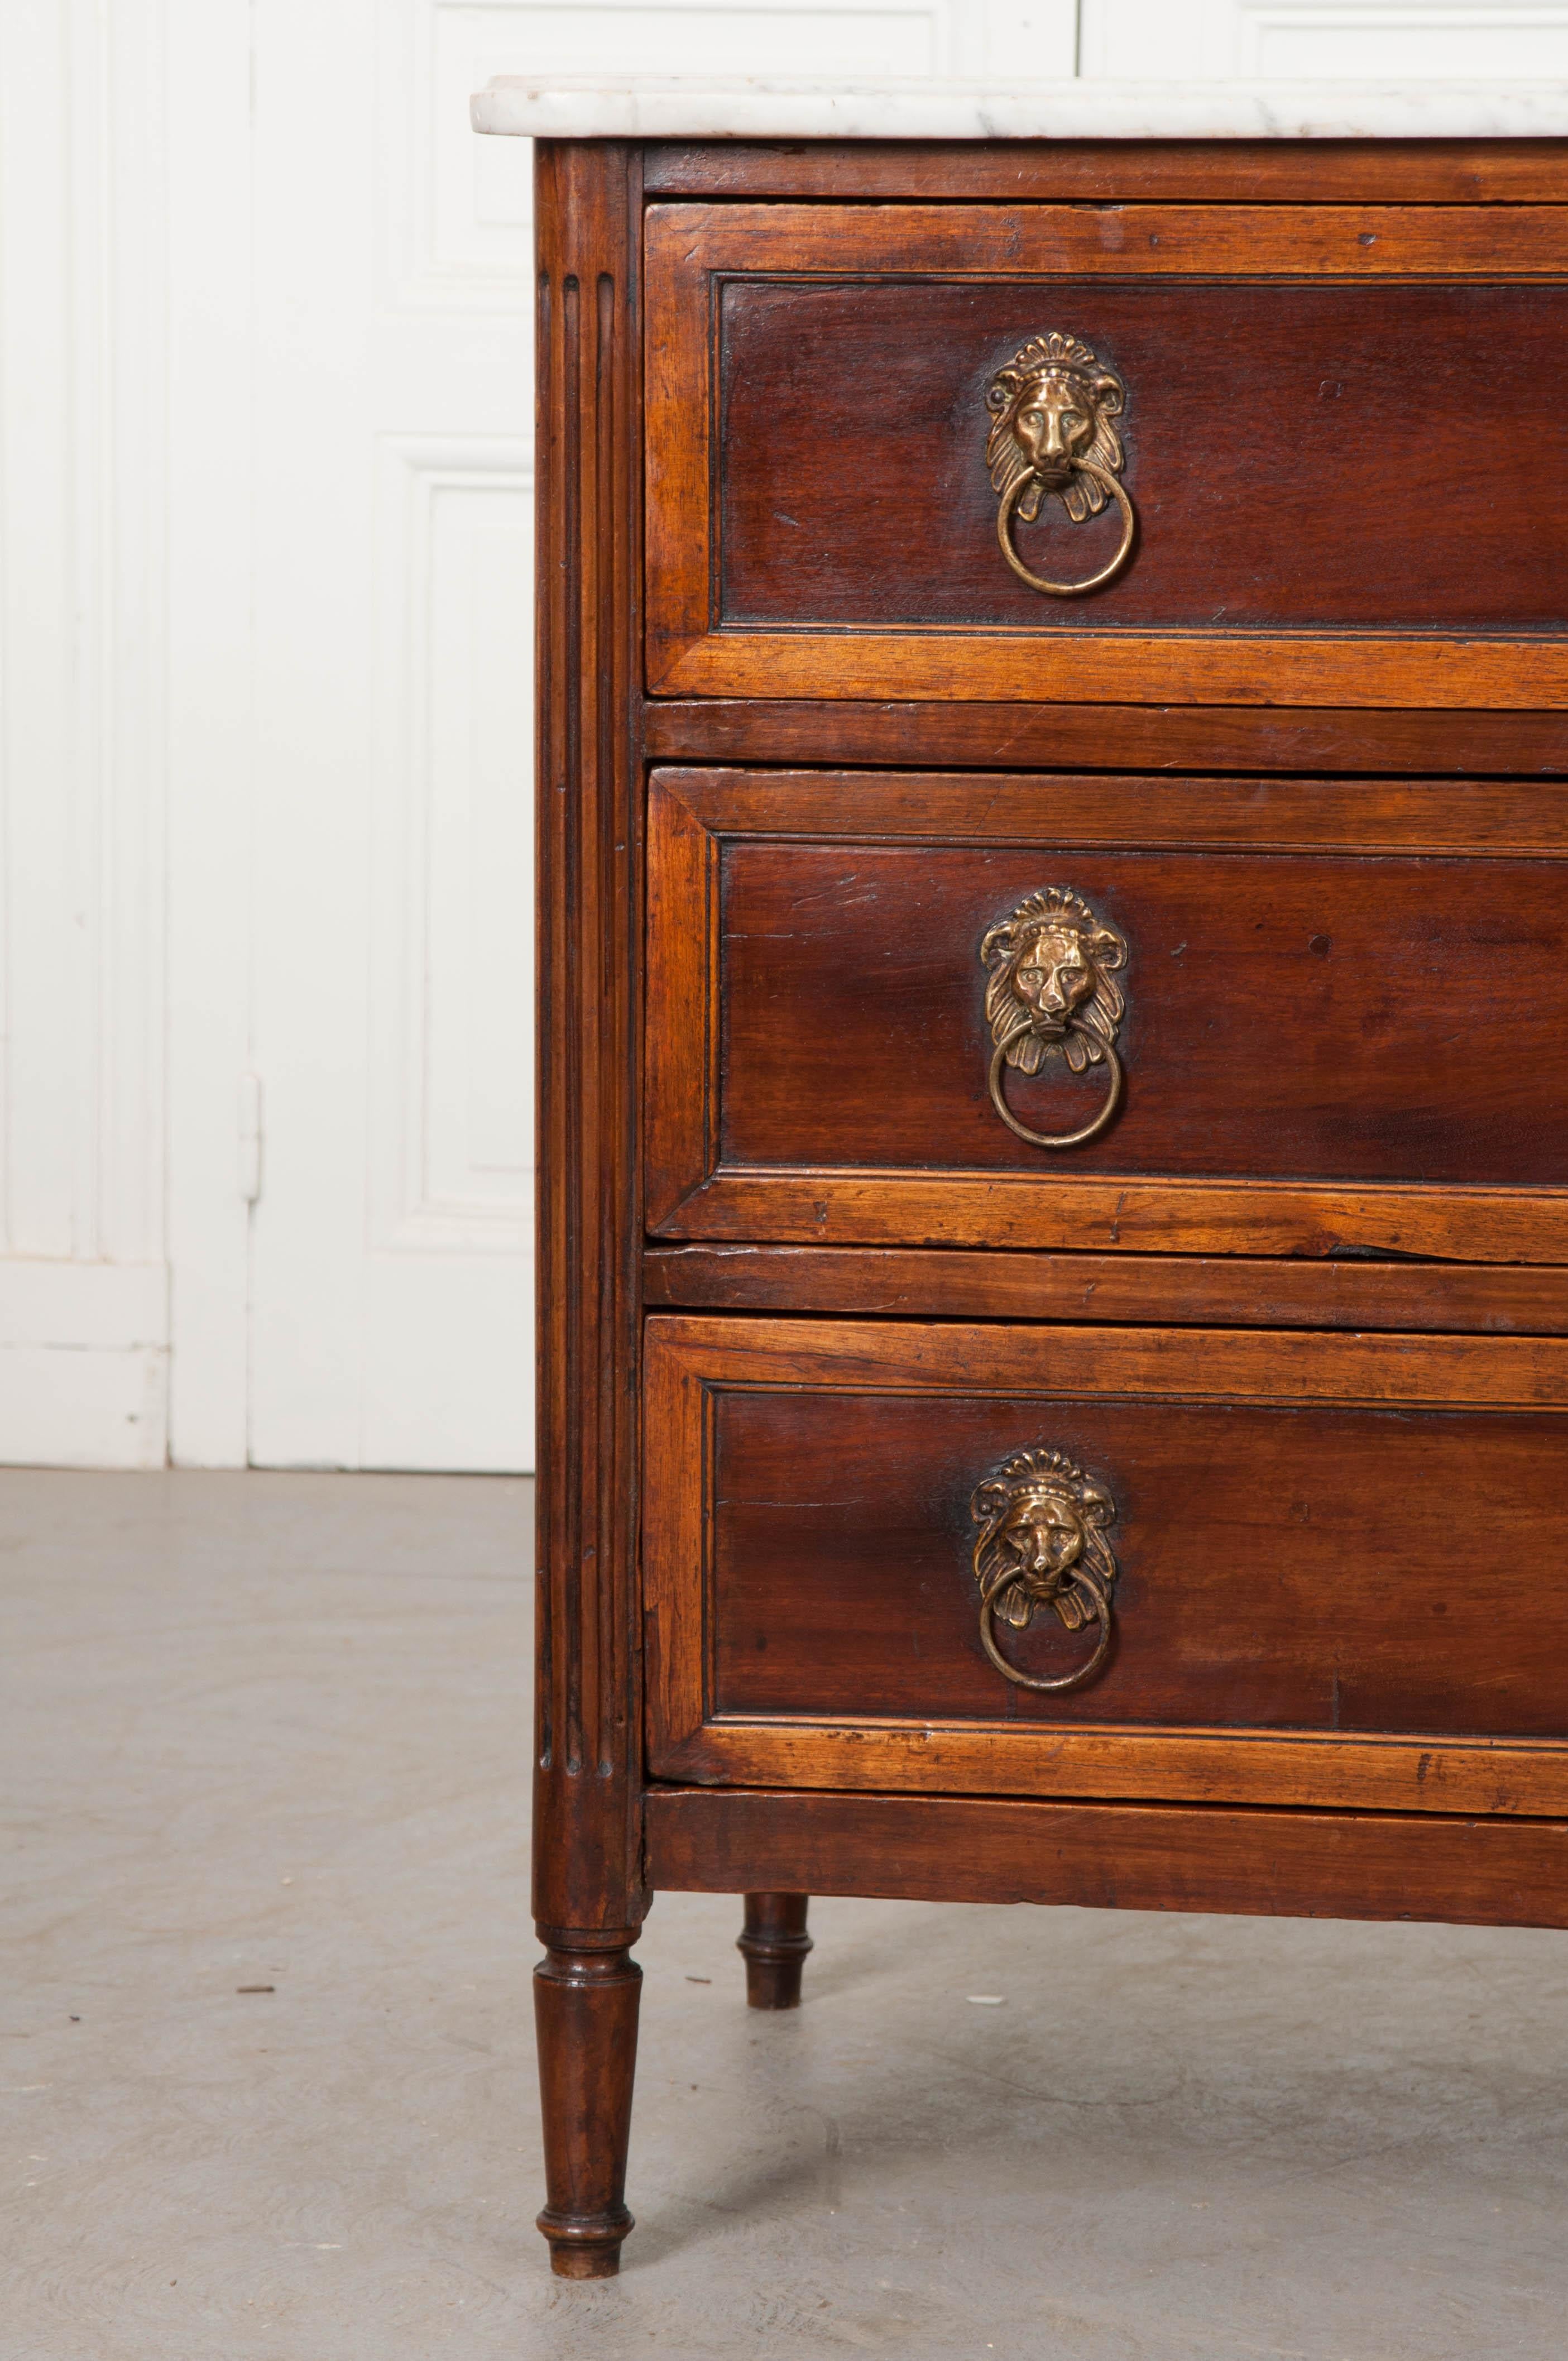 A strapping three-drawer commode, made of mahogany and walnut, from the early part of the 19th century, France. Done in the Louis XVI style, the case piece is topped in its original antique marble. The marble is in good antique condition, with wear